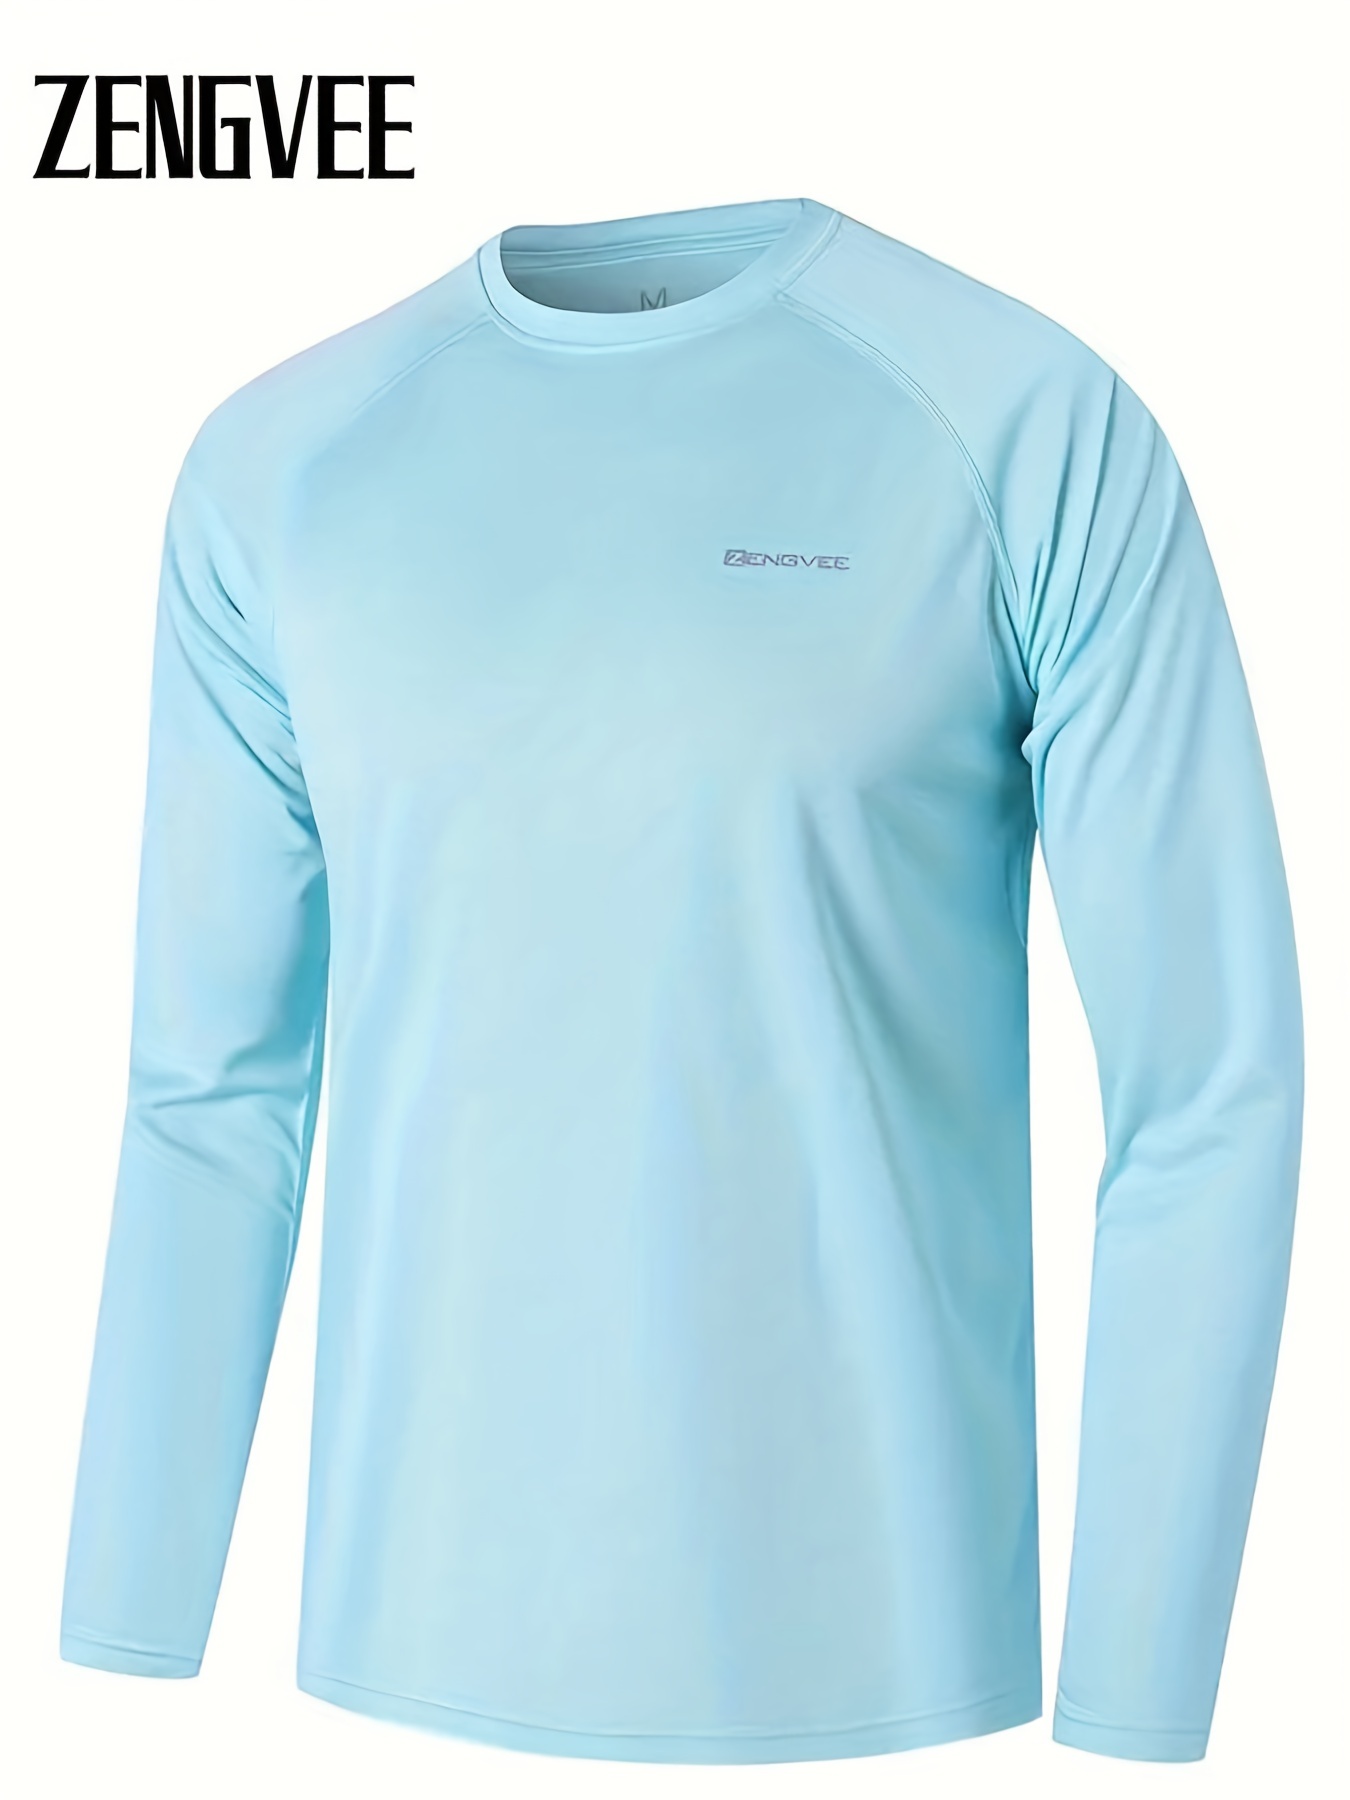 Mens Rash Guard Shirts: Assorted Colors, Sun Protection for Outdoor Athletic Workouts!